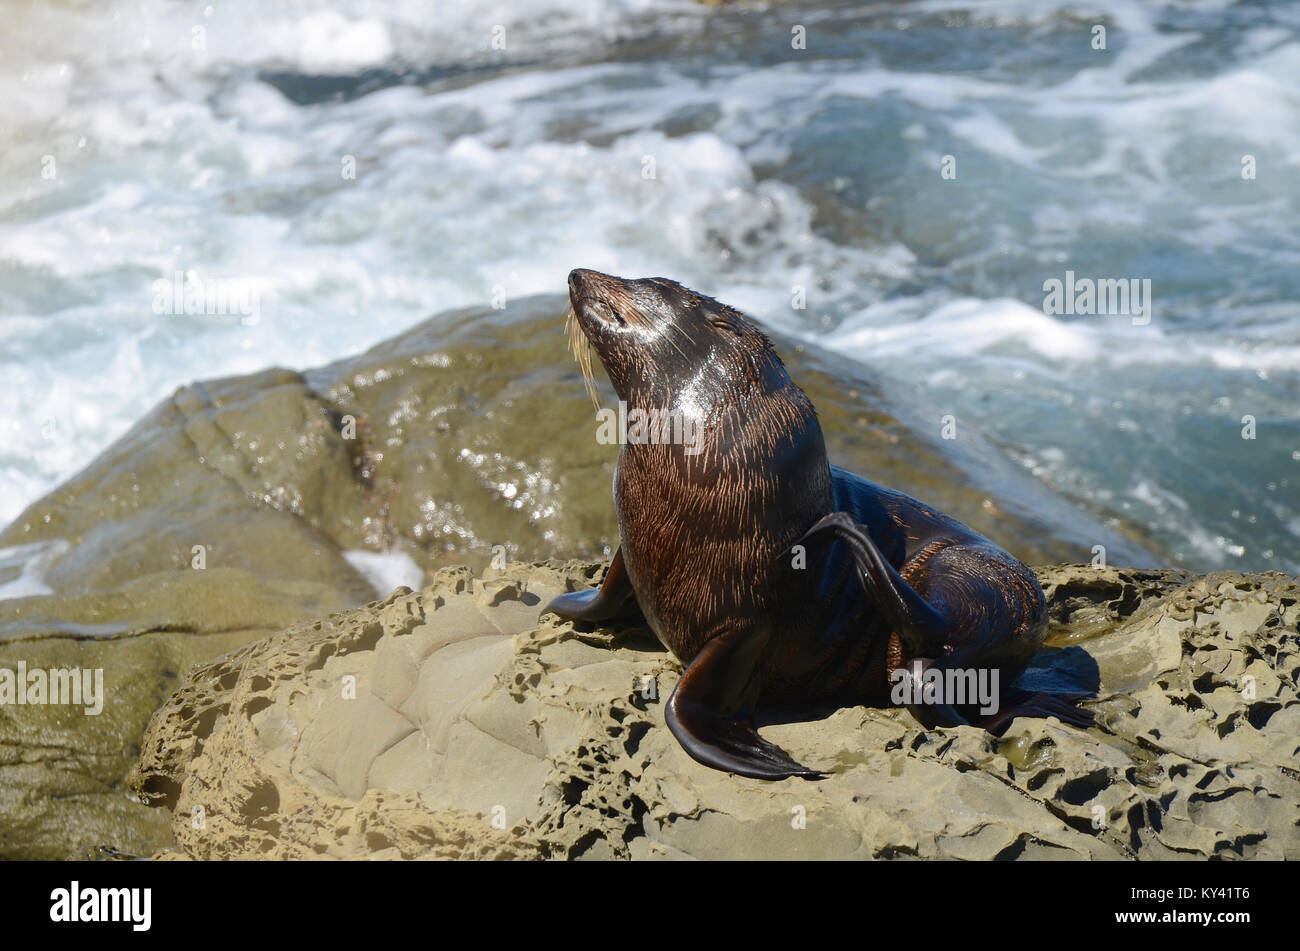 Fur seal of the species of pinnipeds belonging to the Arctocephalinae subfamily in the Otariidae family. On rocks on New Zealand Pacific east coast Stock Photo